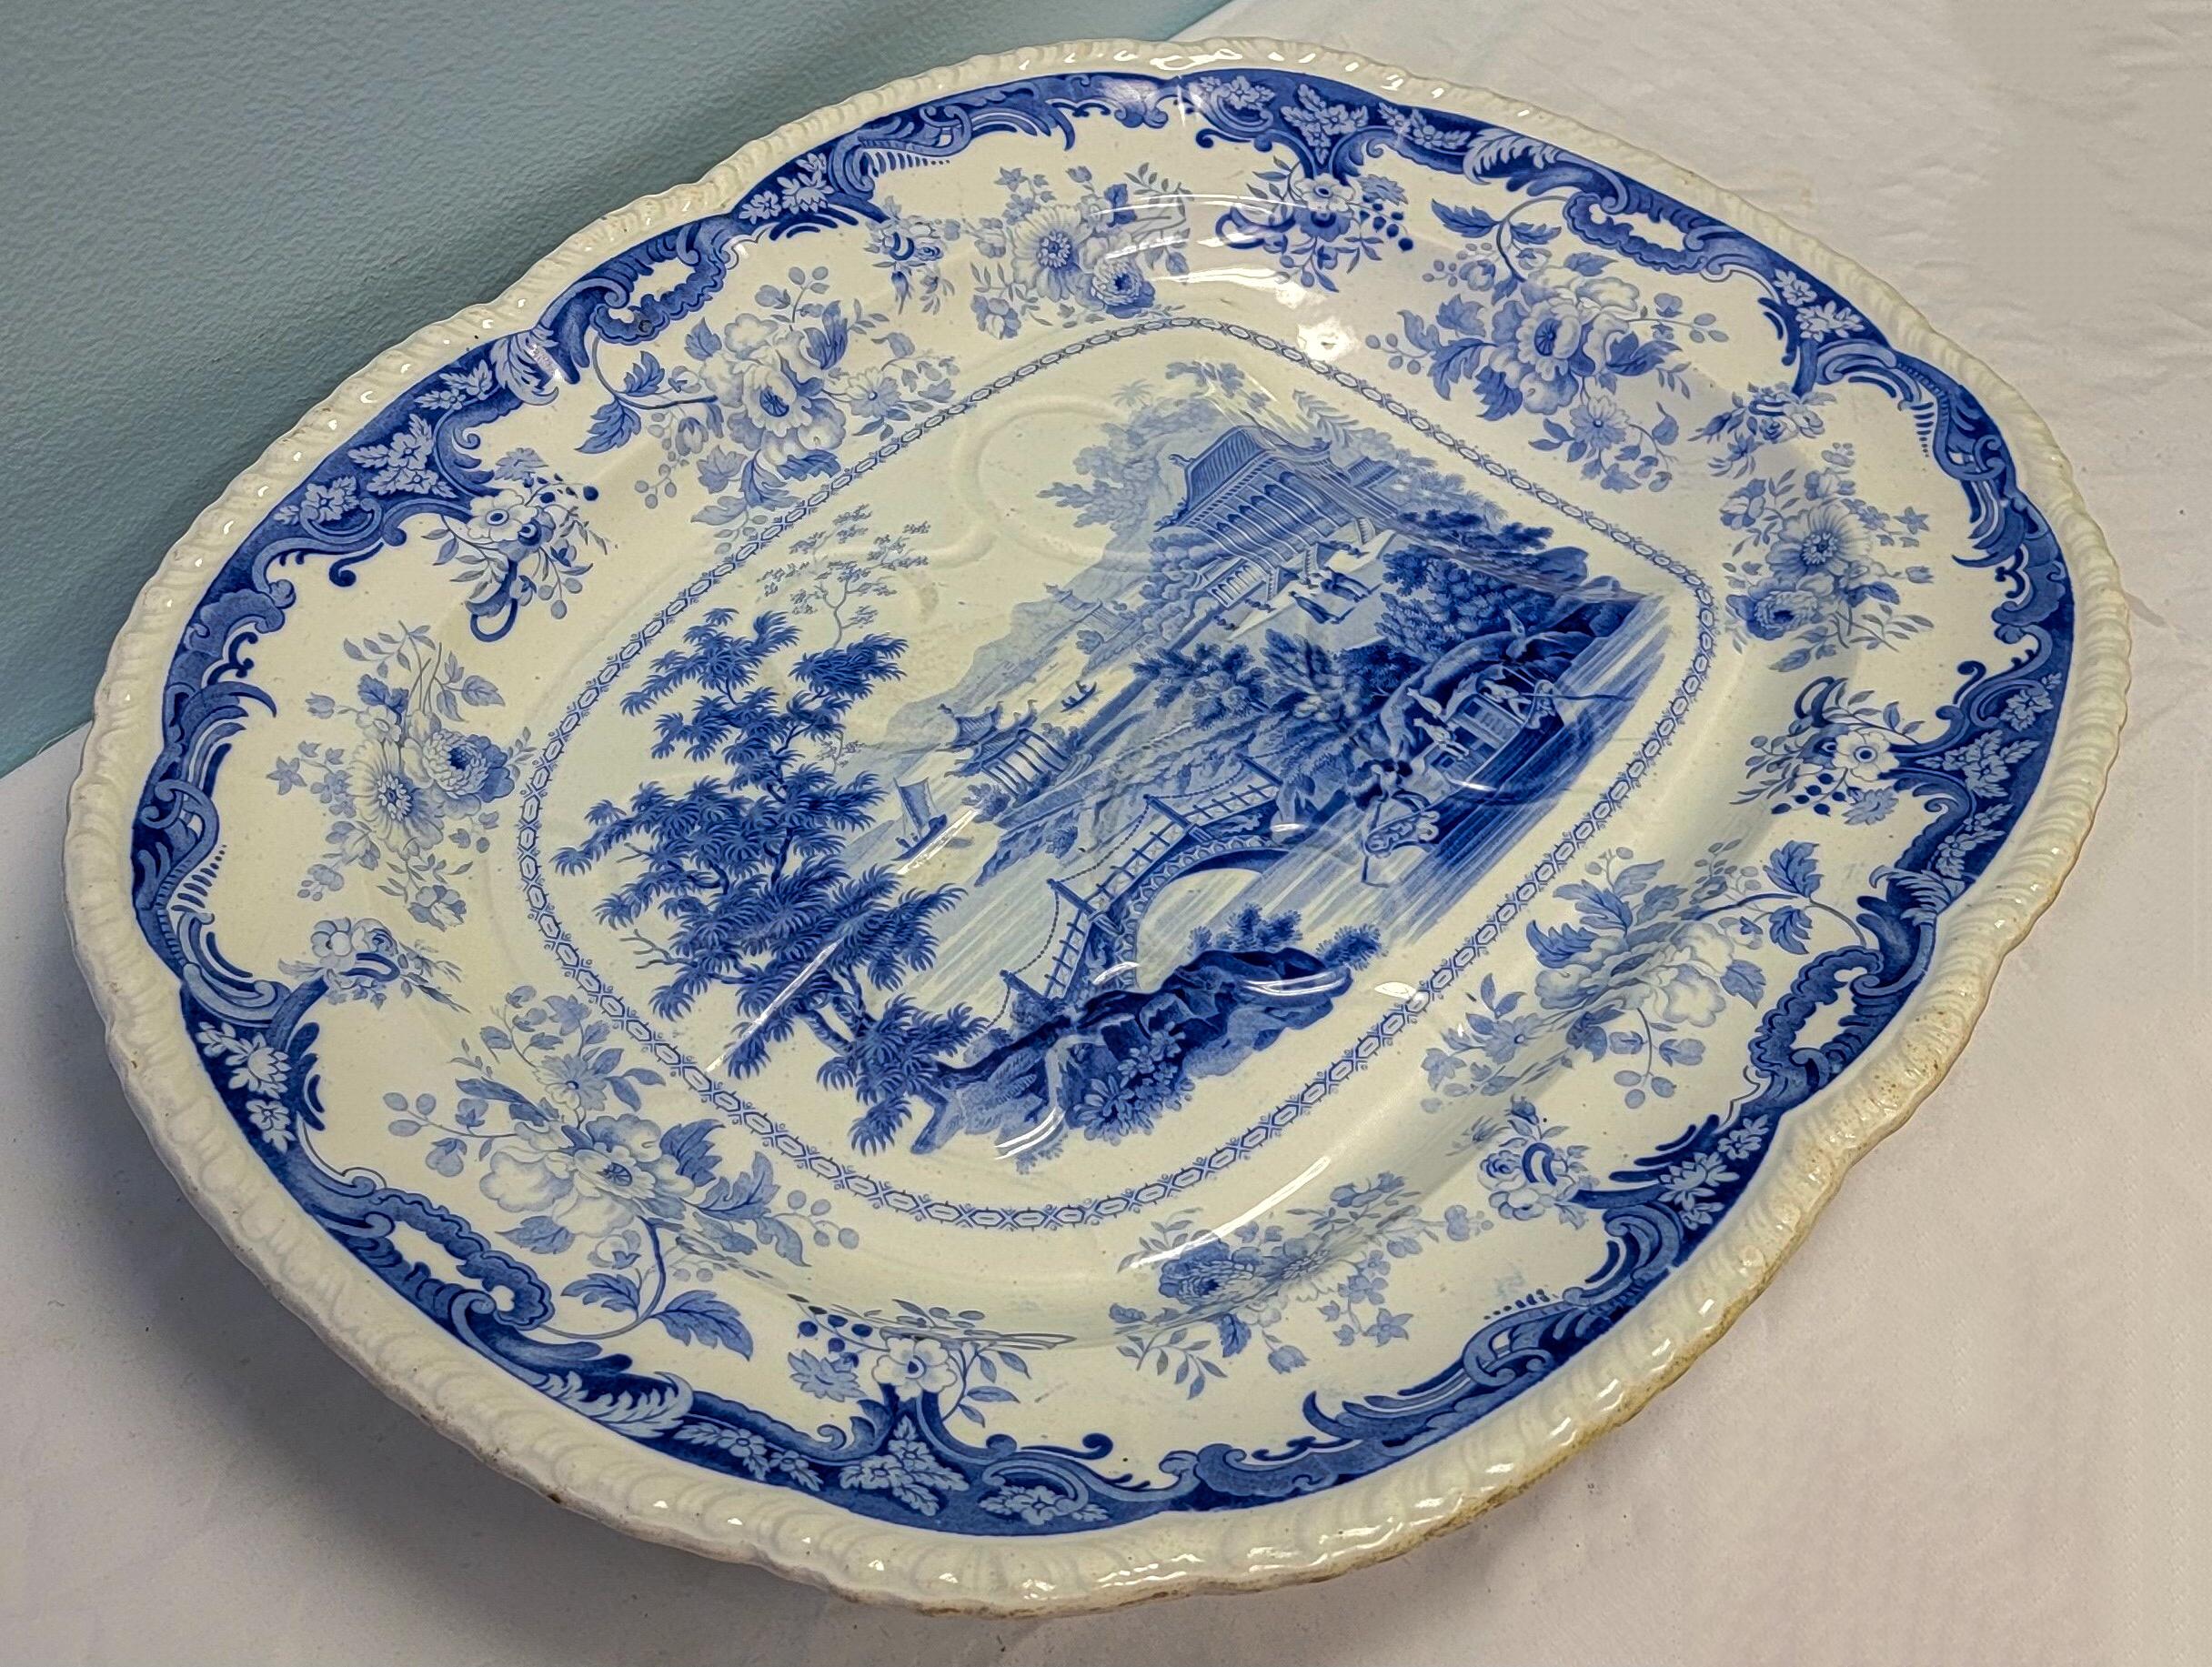 This is a very large Minton Chinese marine opaque blue and white transferware platter. It has a lovely pastoral scene. It is footed and has wells. The underside is marked.